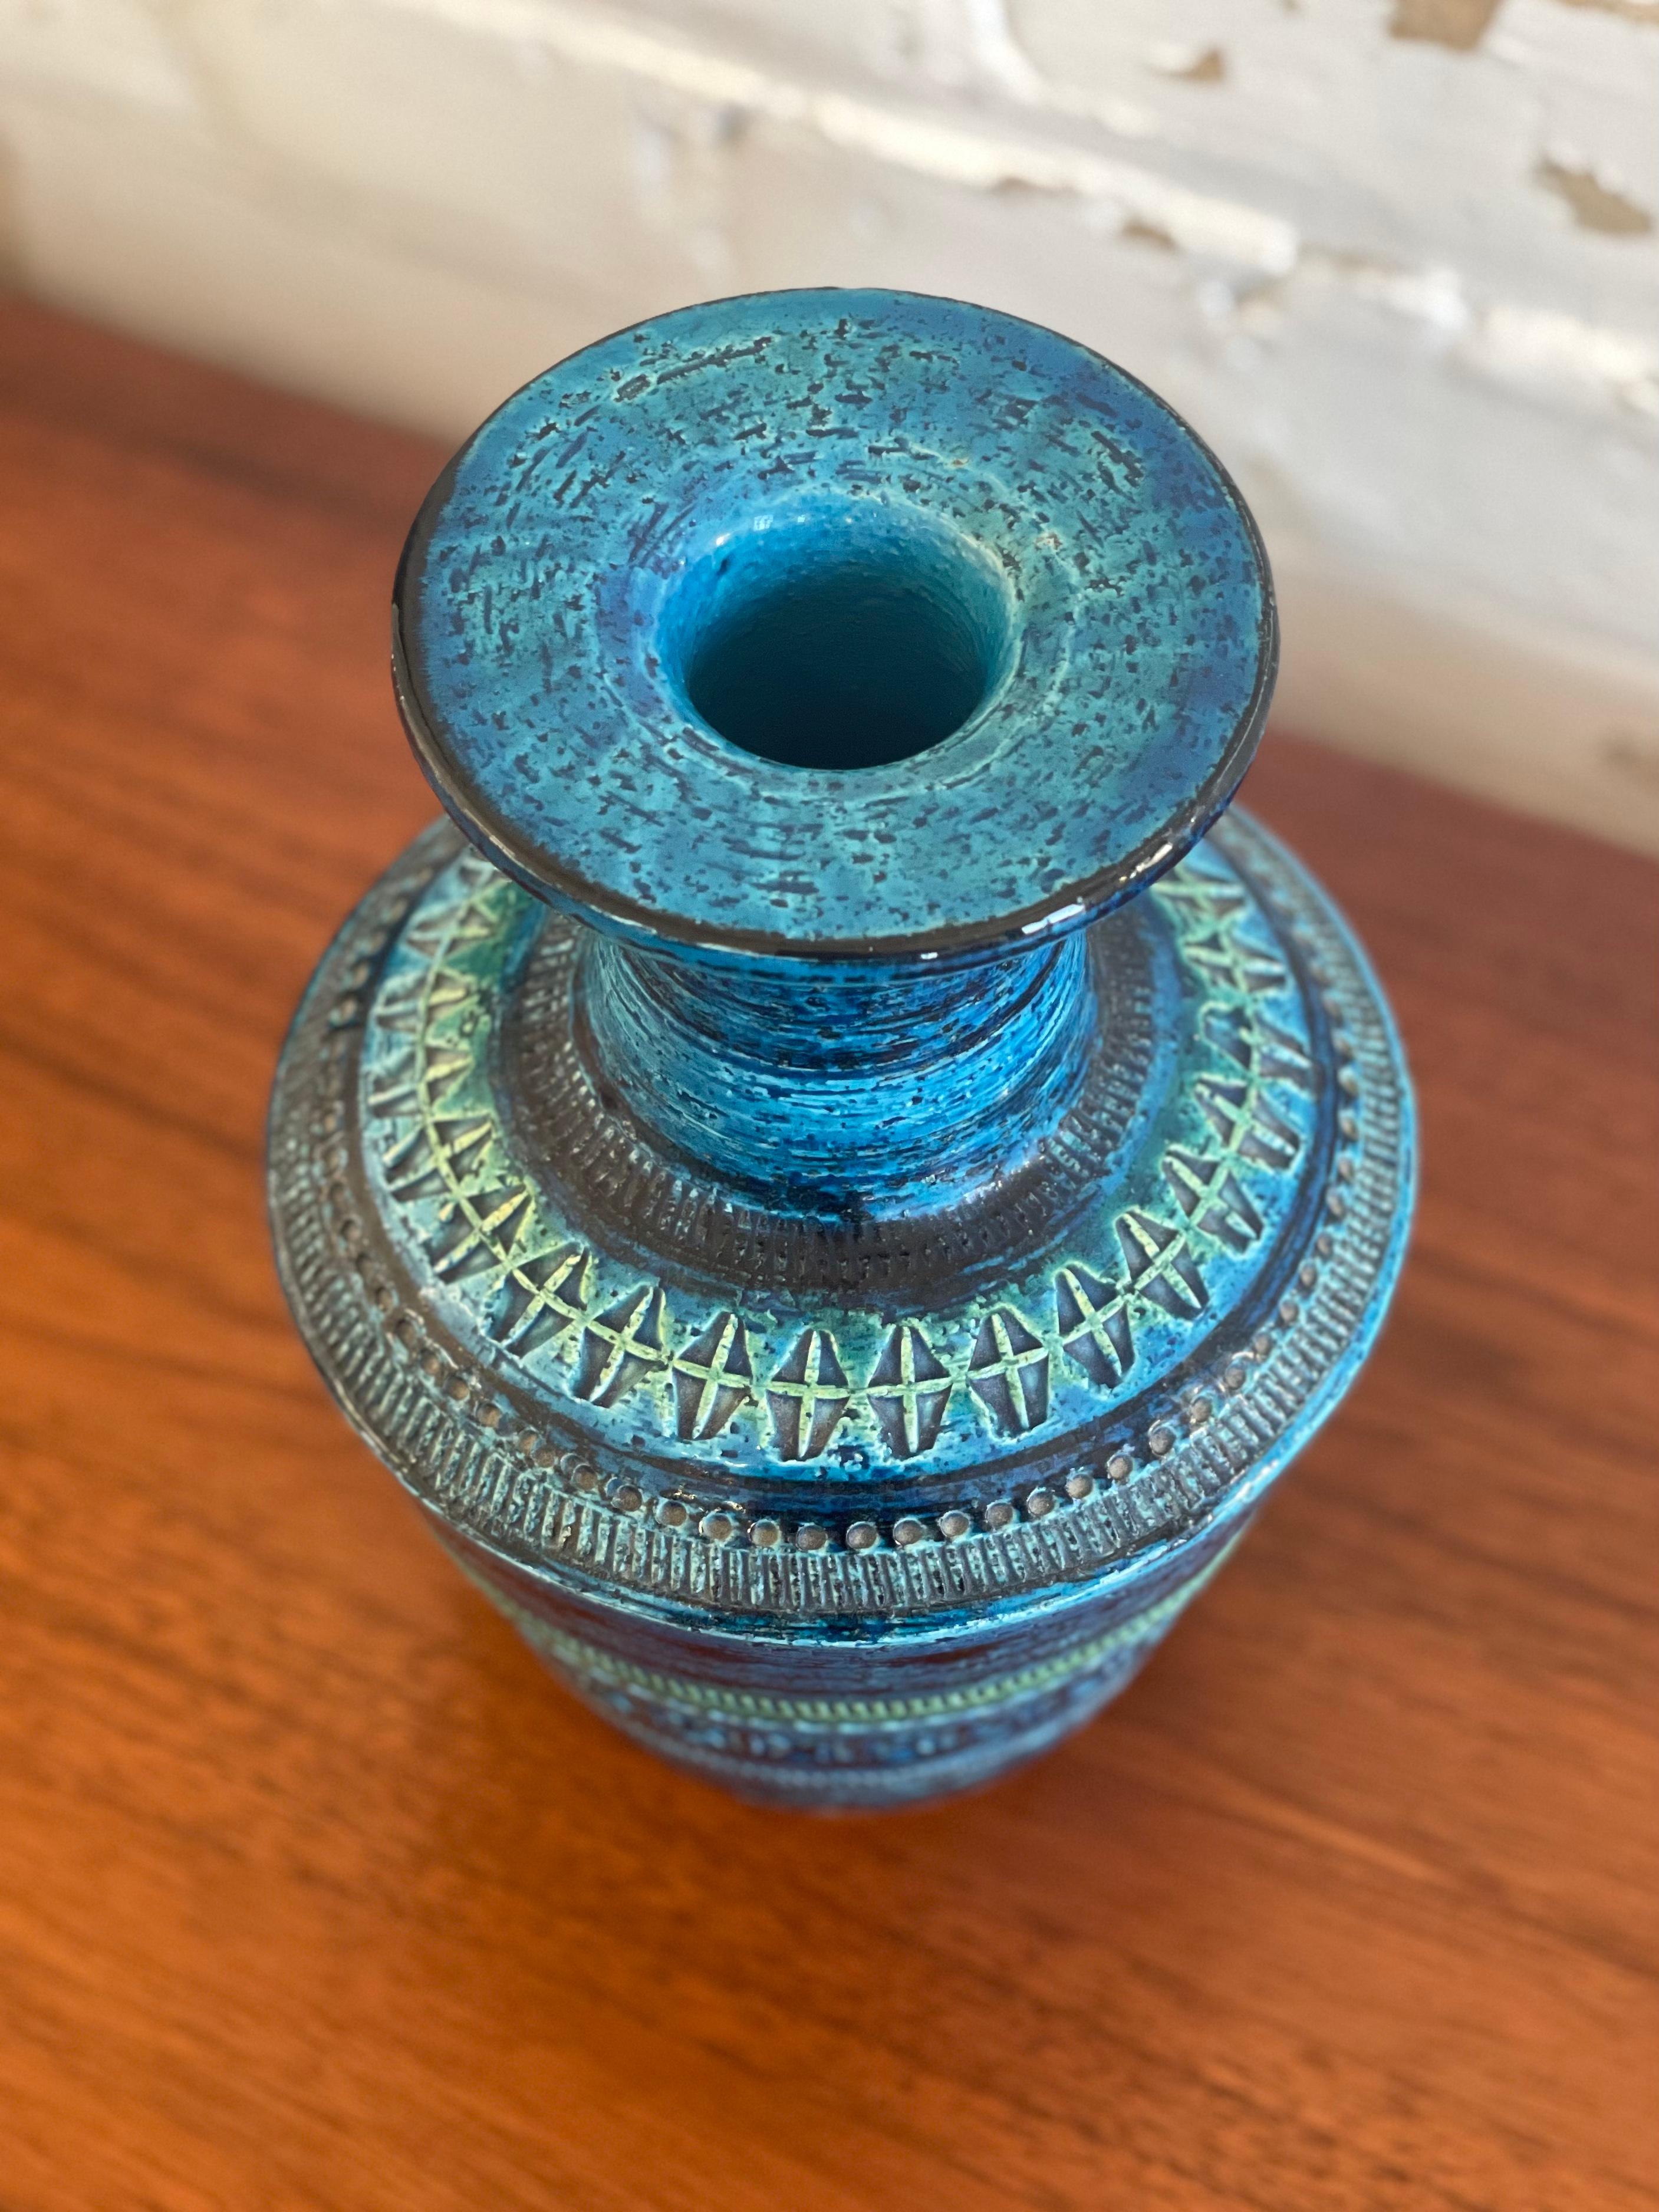 Classic ‘Remini Blu’ incised vase by Also Londi for Bitossi, Italy. Measures 6” W x 8.5” H. Excellent condition with minimal traces of wear. No chips or cracks. 